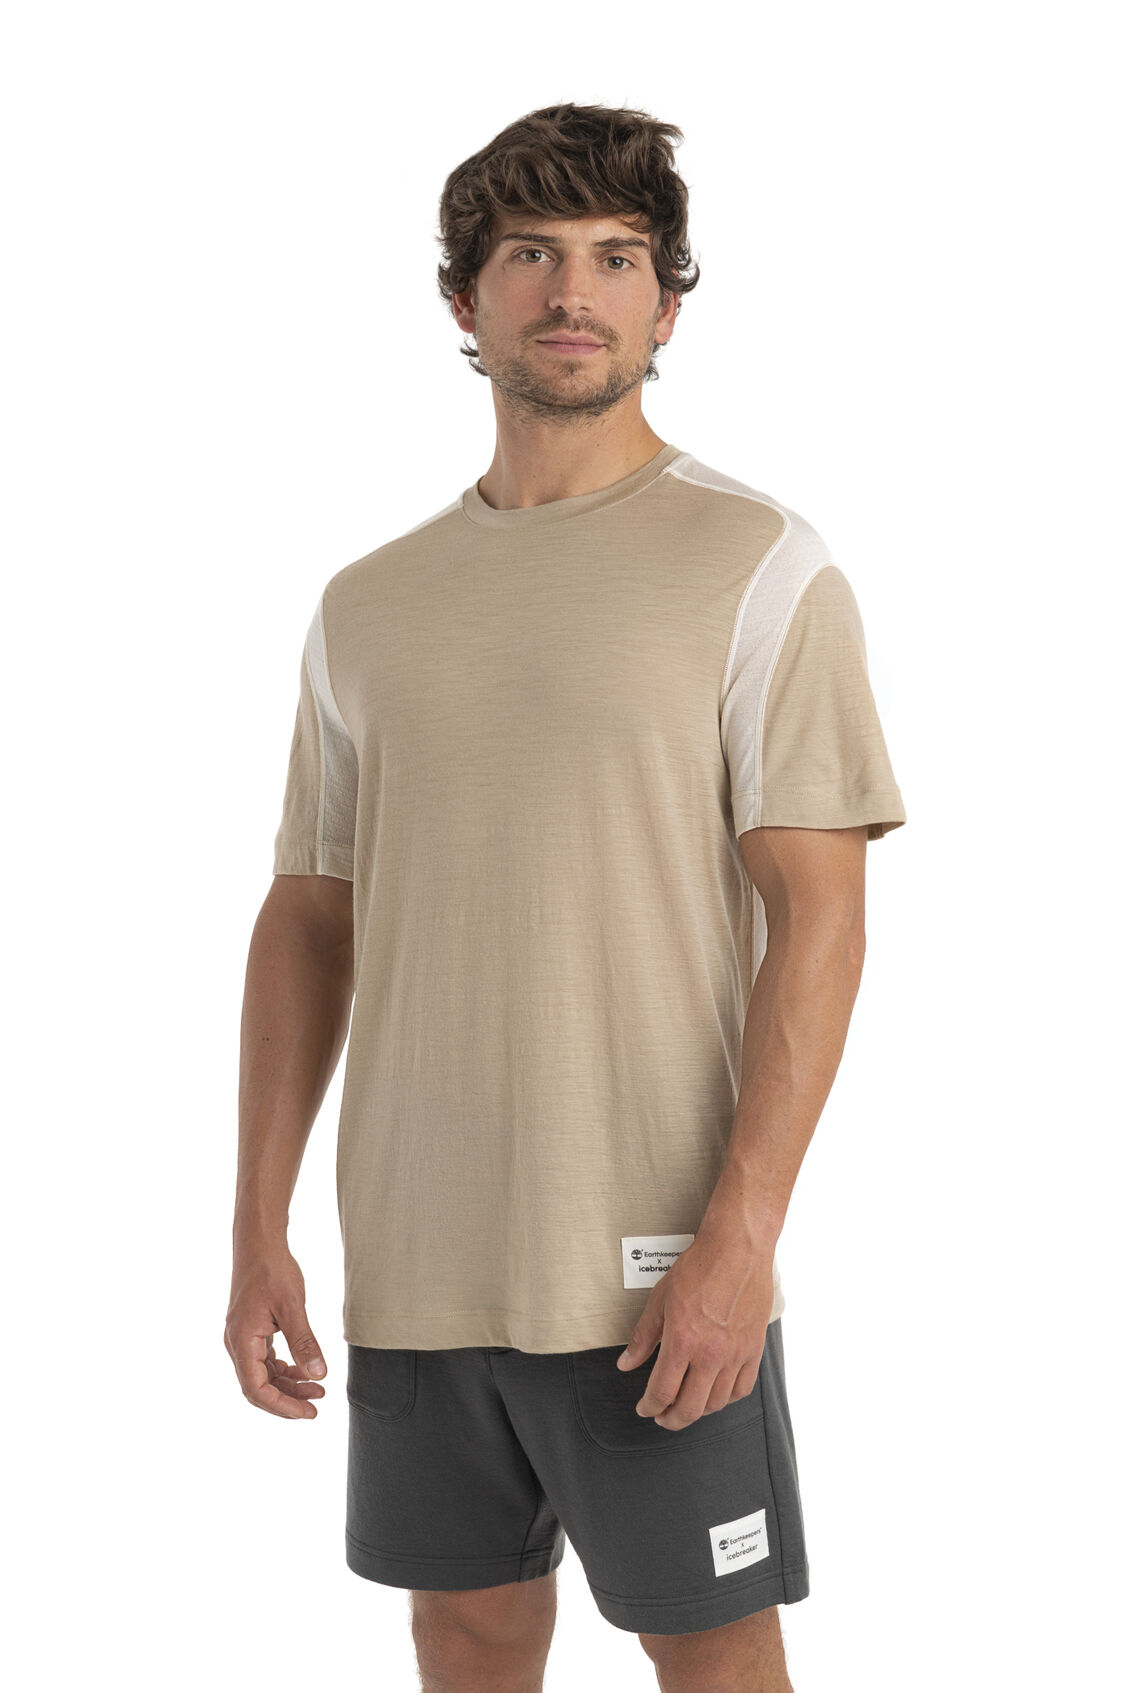 Mens Timberland x icebreaker Merino ZoneKnit™ Short Sleeve T-Shirt Designed in collaboration with Timberland, the Timberland x icebreaker Merino ZoneKnit™ Short Sleeve Tee is a clean, breathable and lightweight top with mesh panels to help regulate your body temperature.